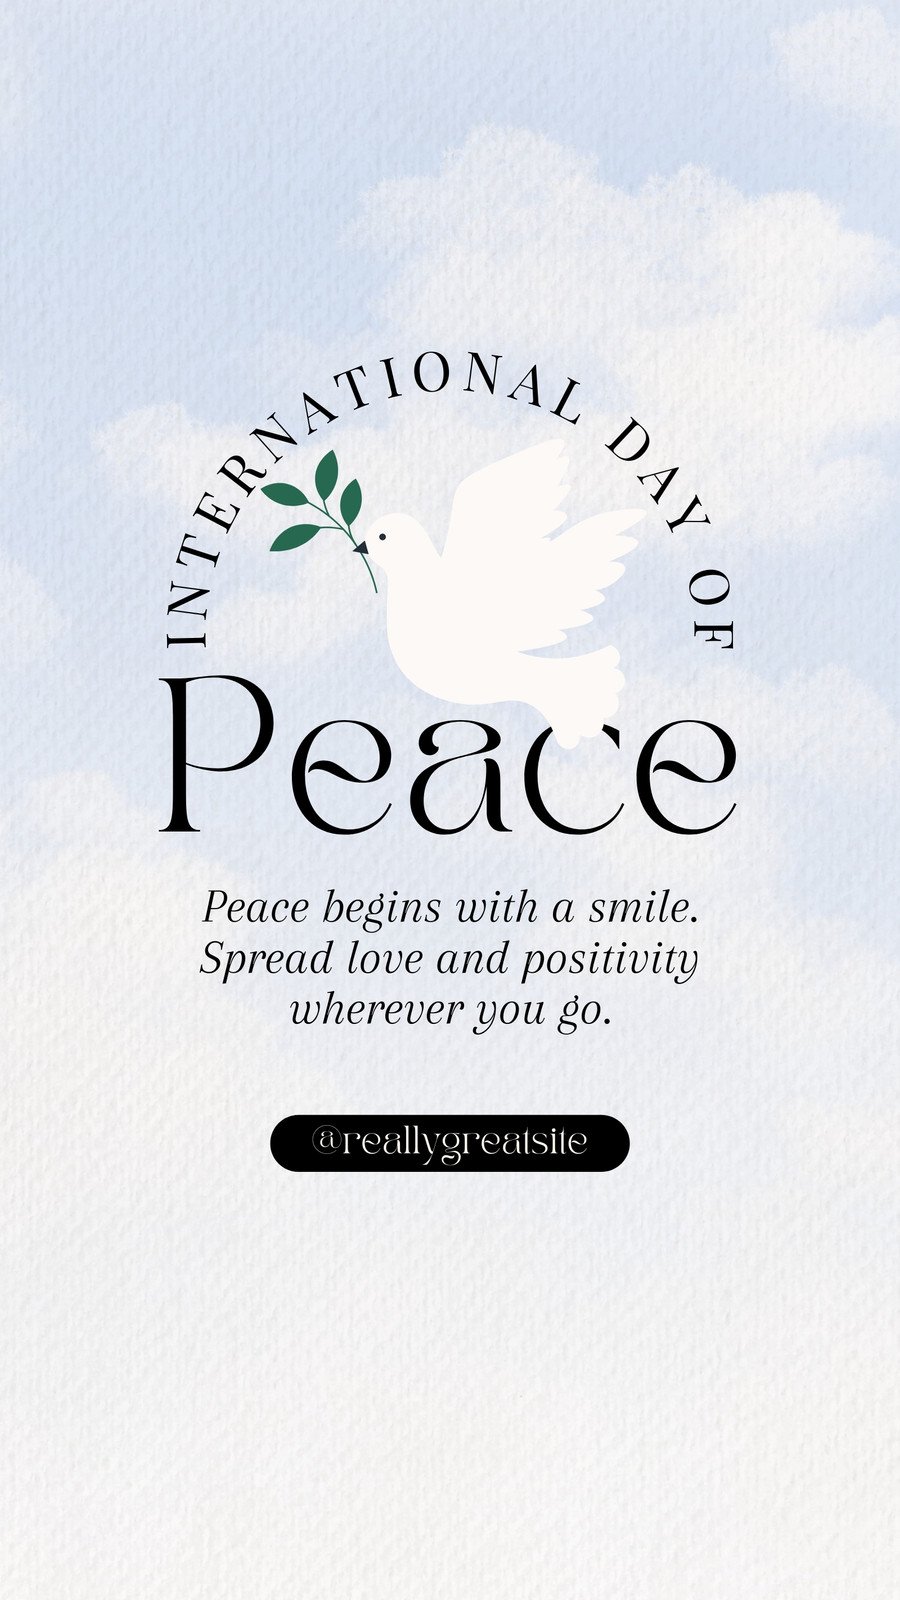 peace images